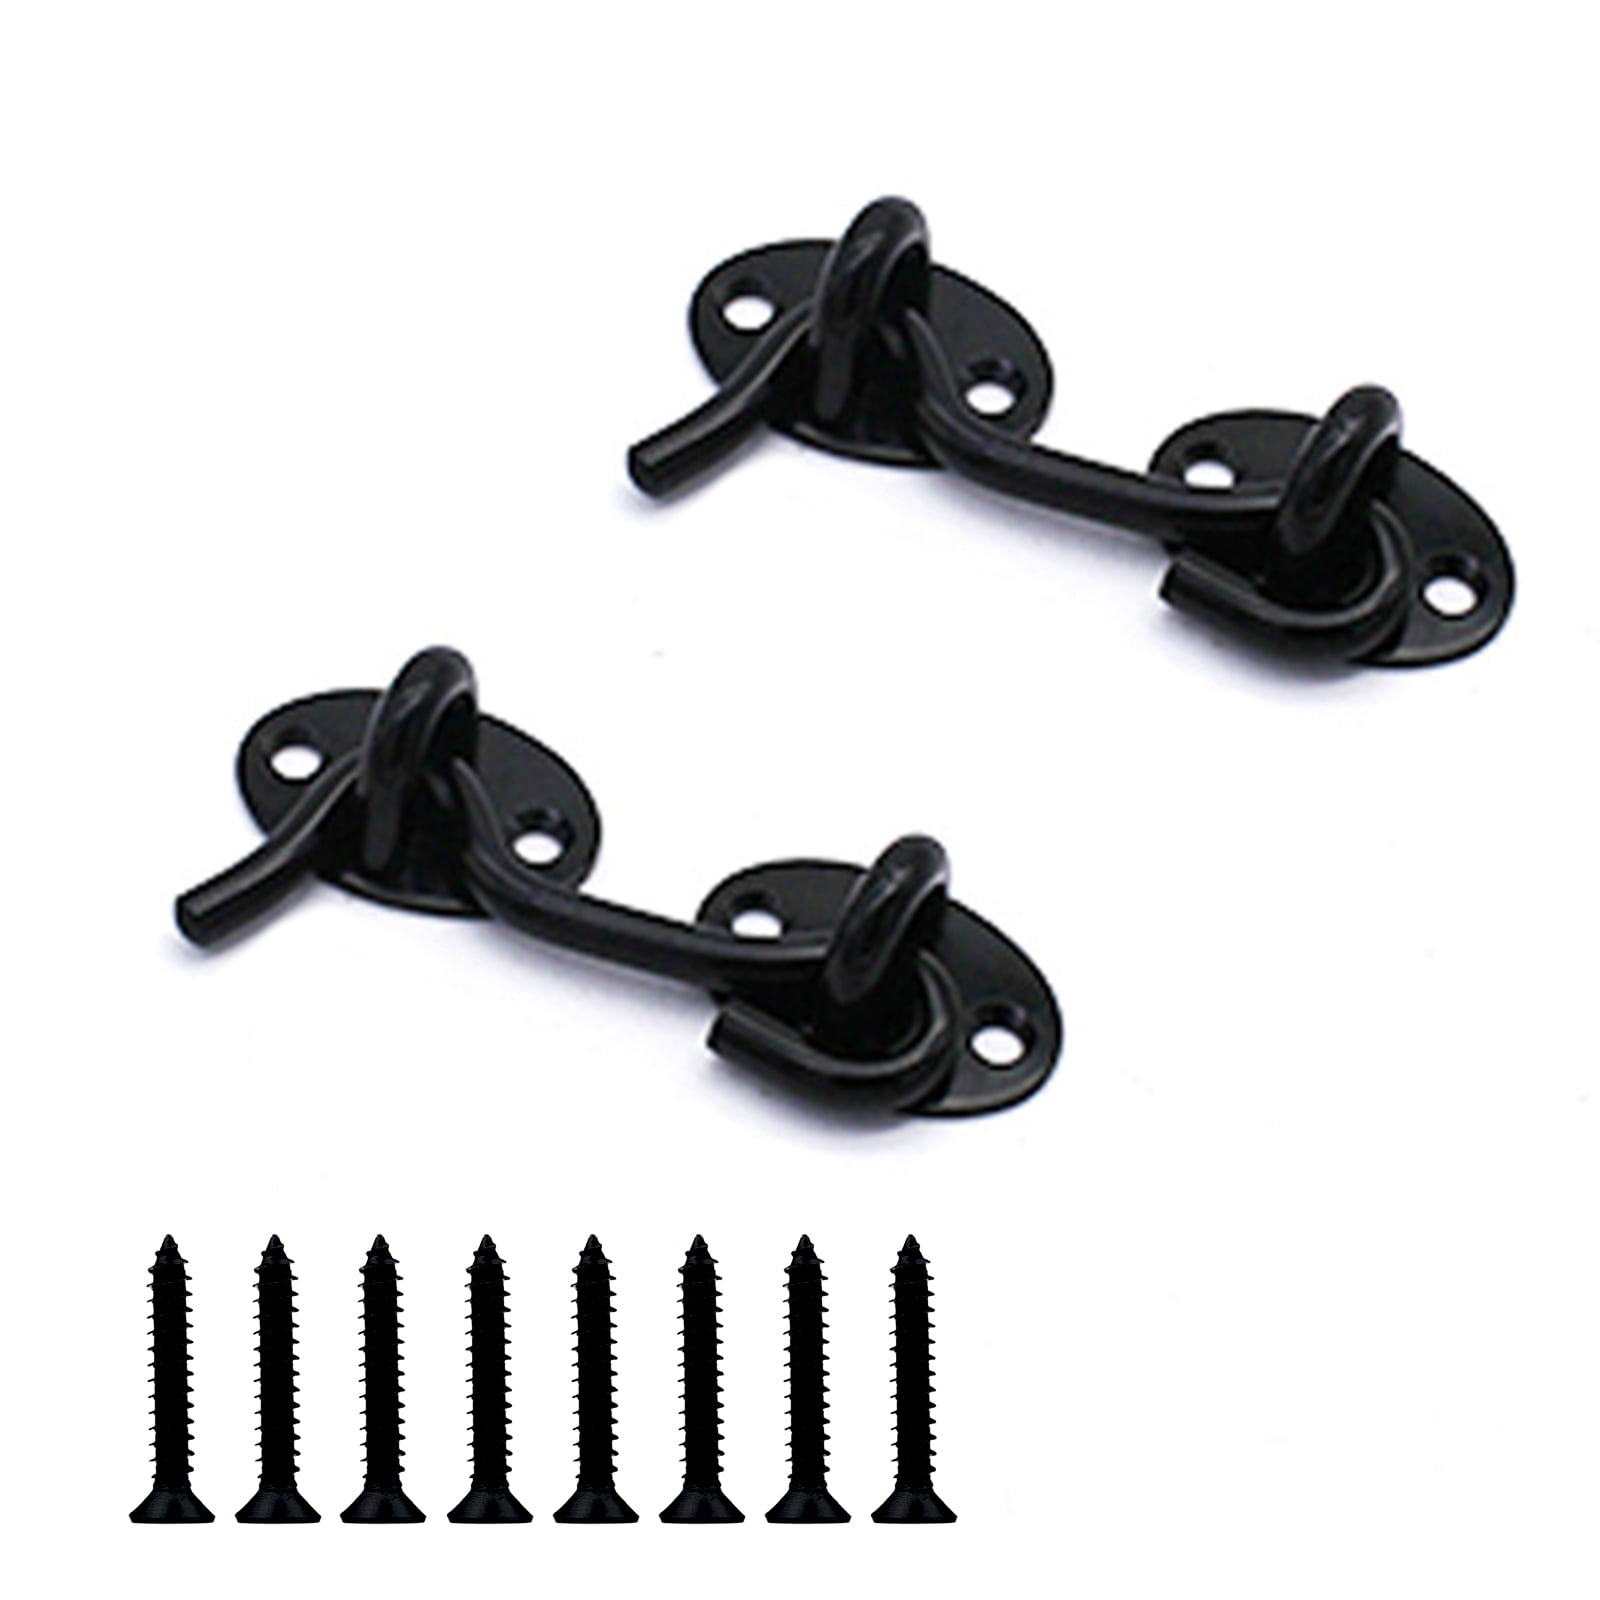 DOITOOL 2PCS 6 Inch Hook and Eye Latch Black Heavy Duty Solid Stainless Steel Gate Latch for Wooden Fences or Metal Gates,Safety Sliding Barn Door Latch Lock for Barn Door,Window,Shed 6 Inch,Black